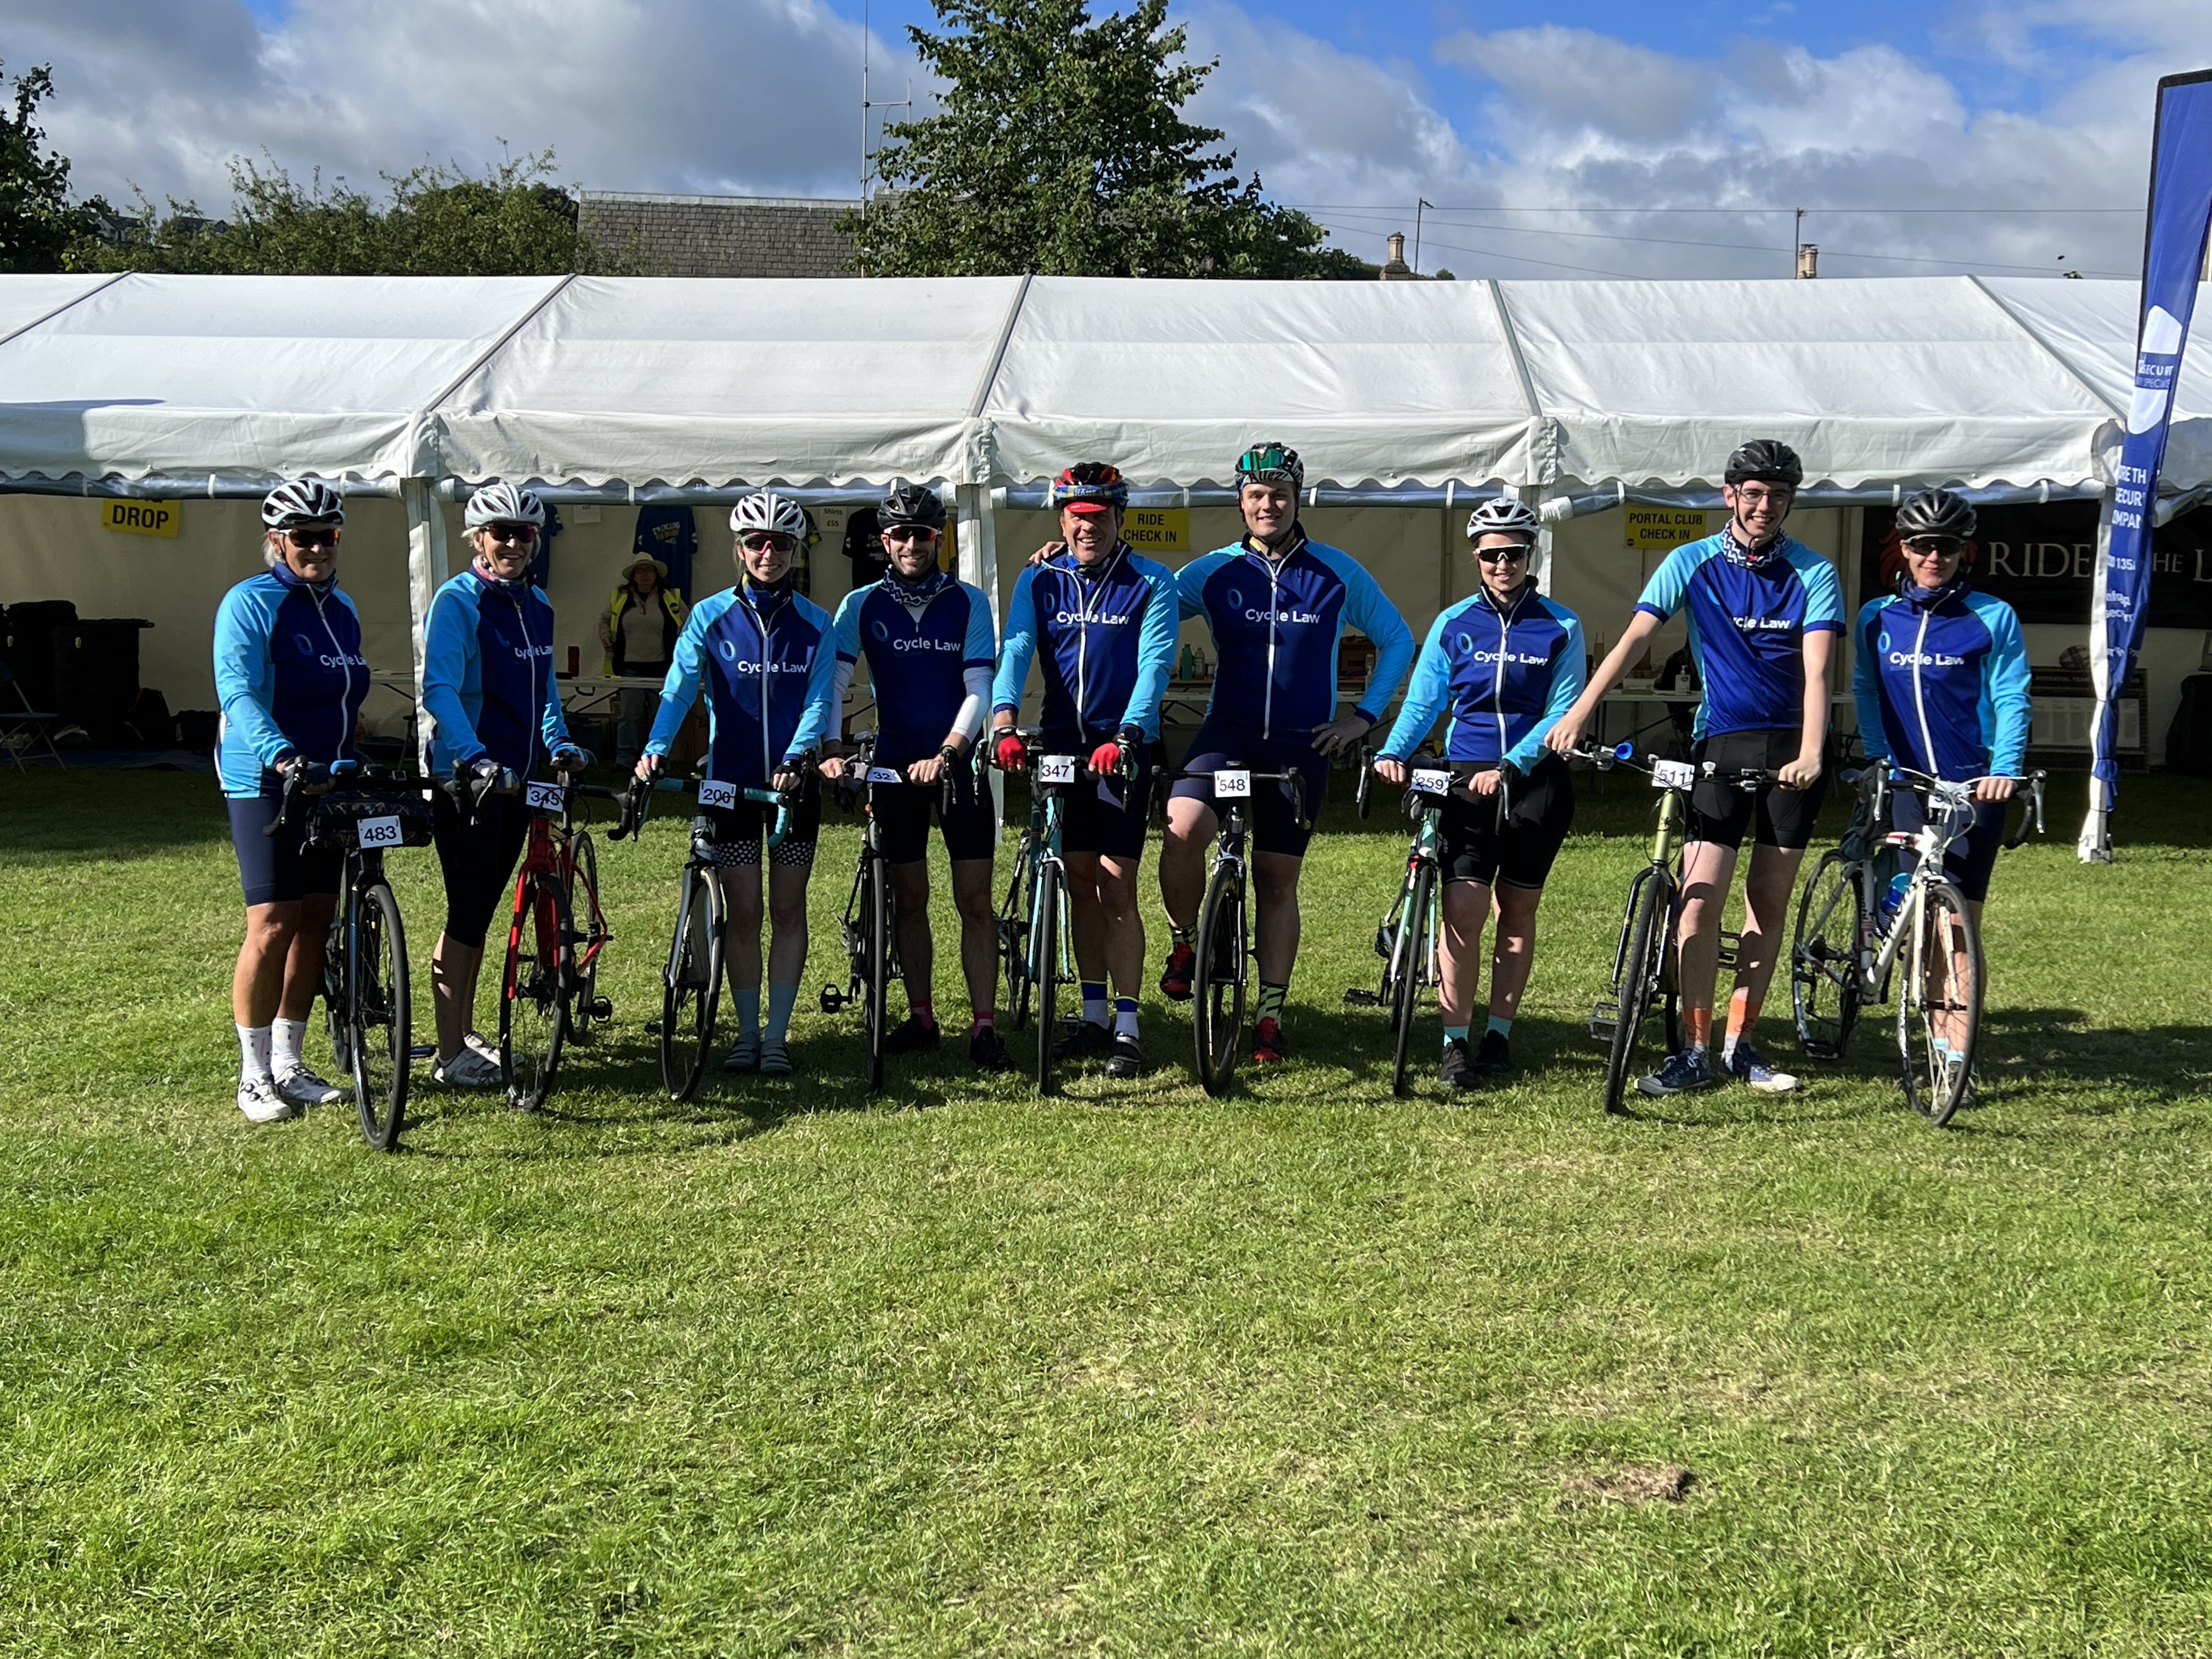 The photo show the Cycle Law Scotland legal team dresses in their cycle team kit, with their bikes at an event. There is a large marquee in the background